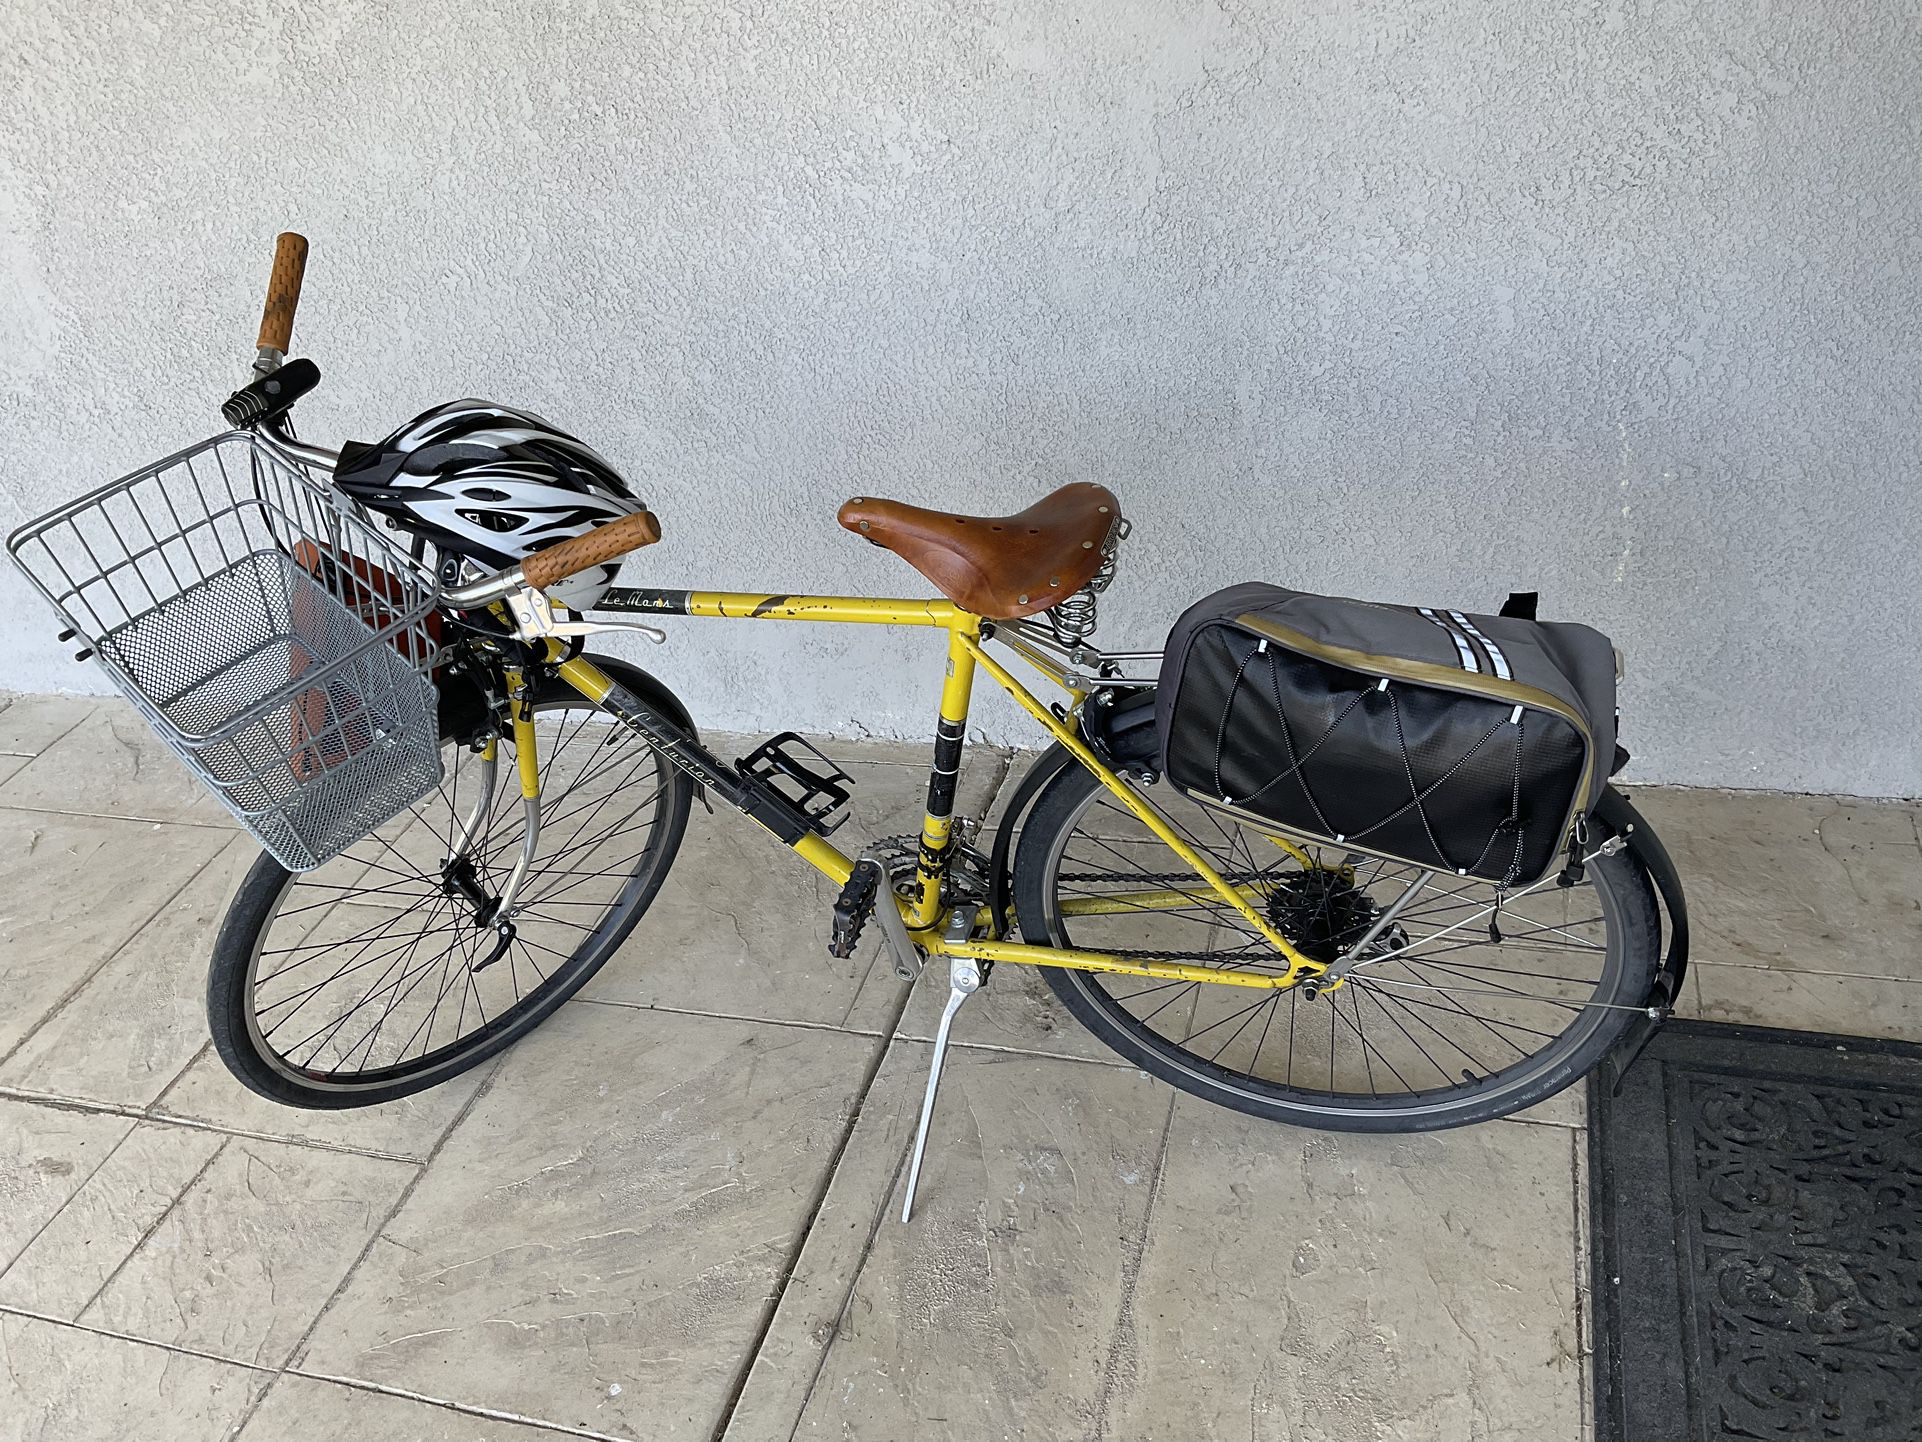 Bike For Sale (Pickup On May 17 or Later in Merced)